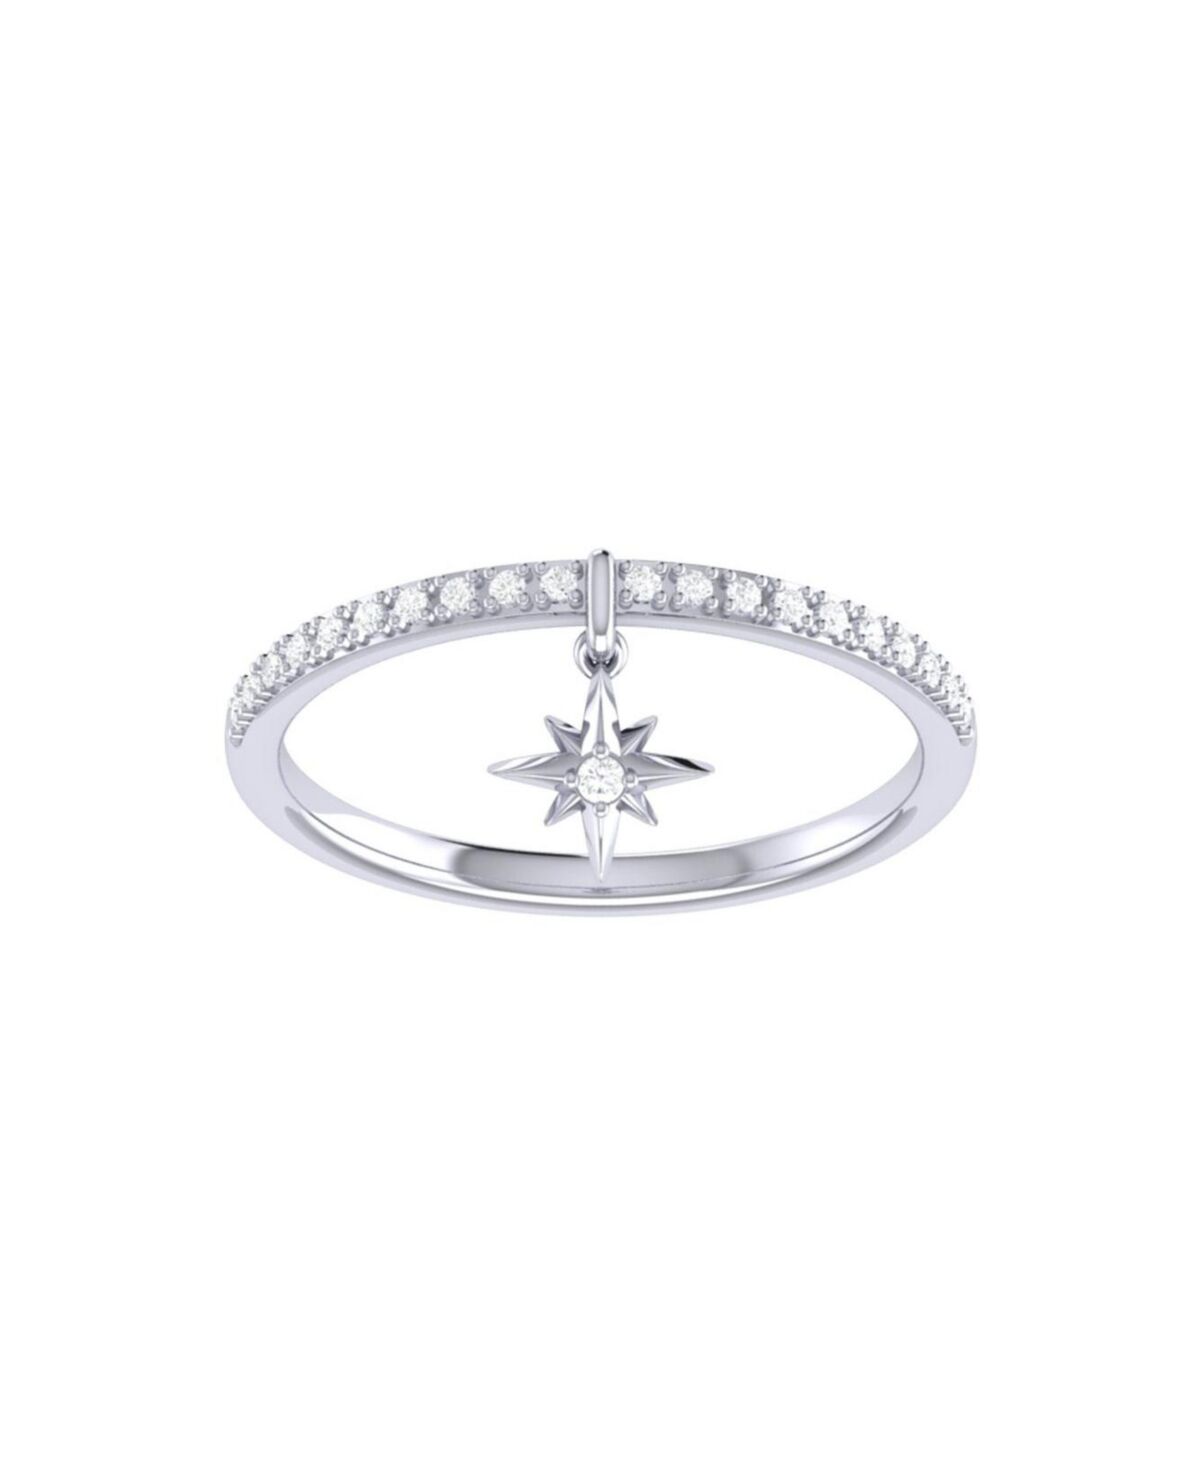 LuvMyJewelry Little North Star Design Sterling Silver Diamond Charm Women Ring - White